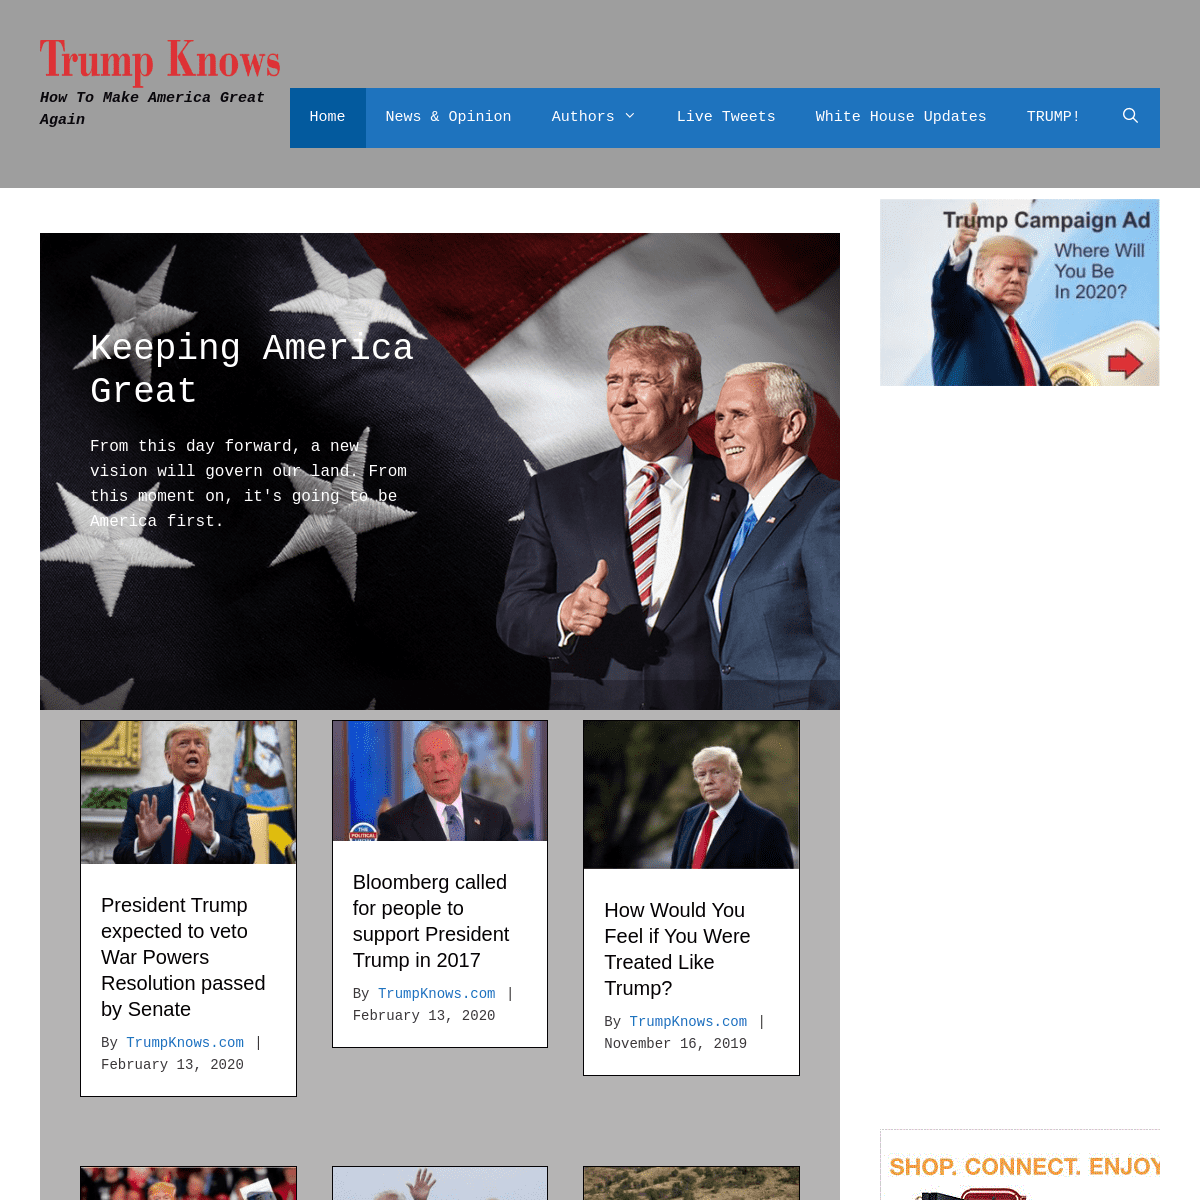 A complete backup of trumpknows.com